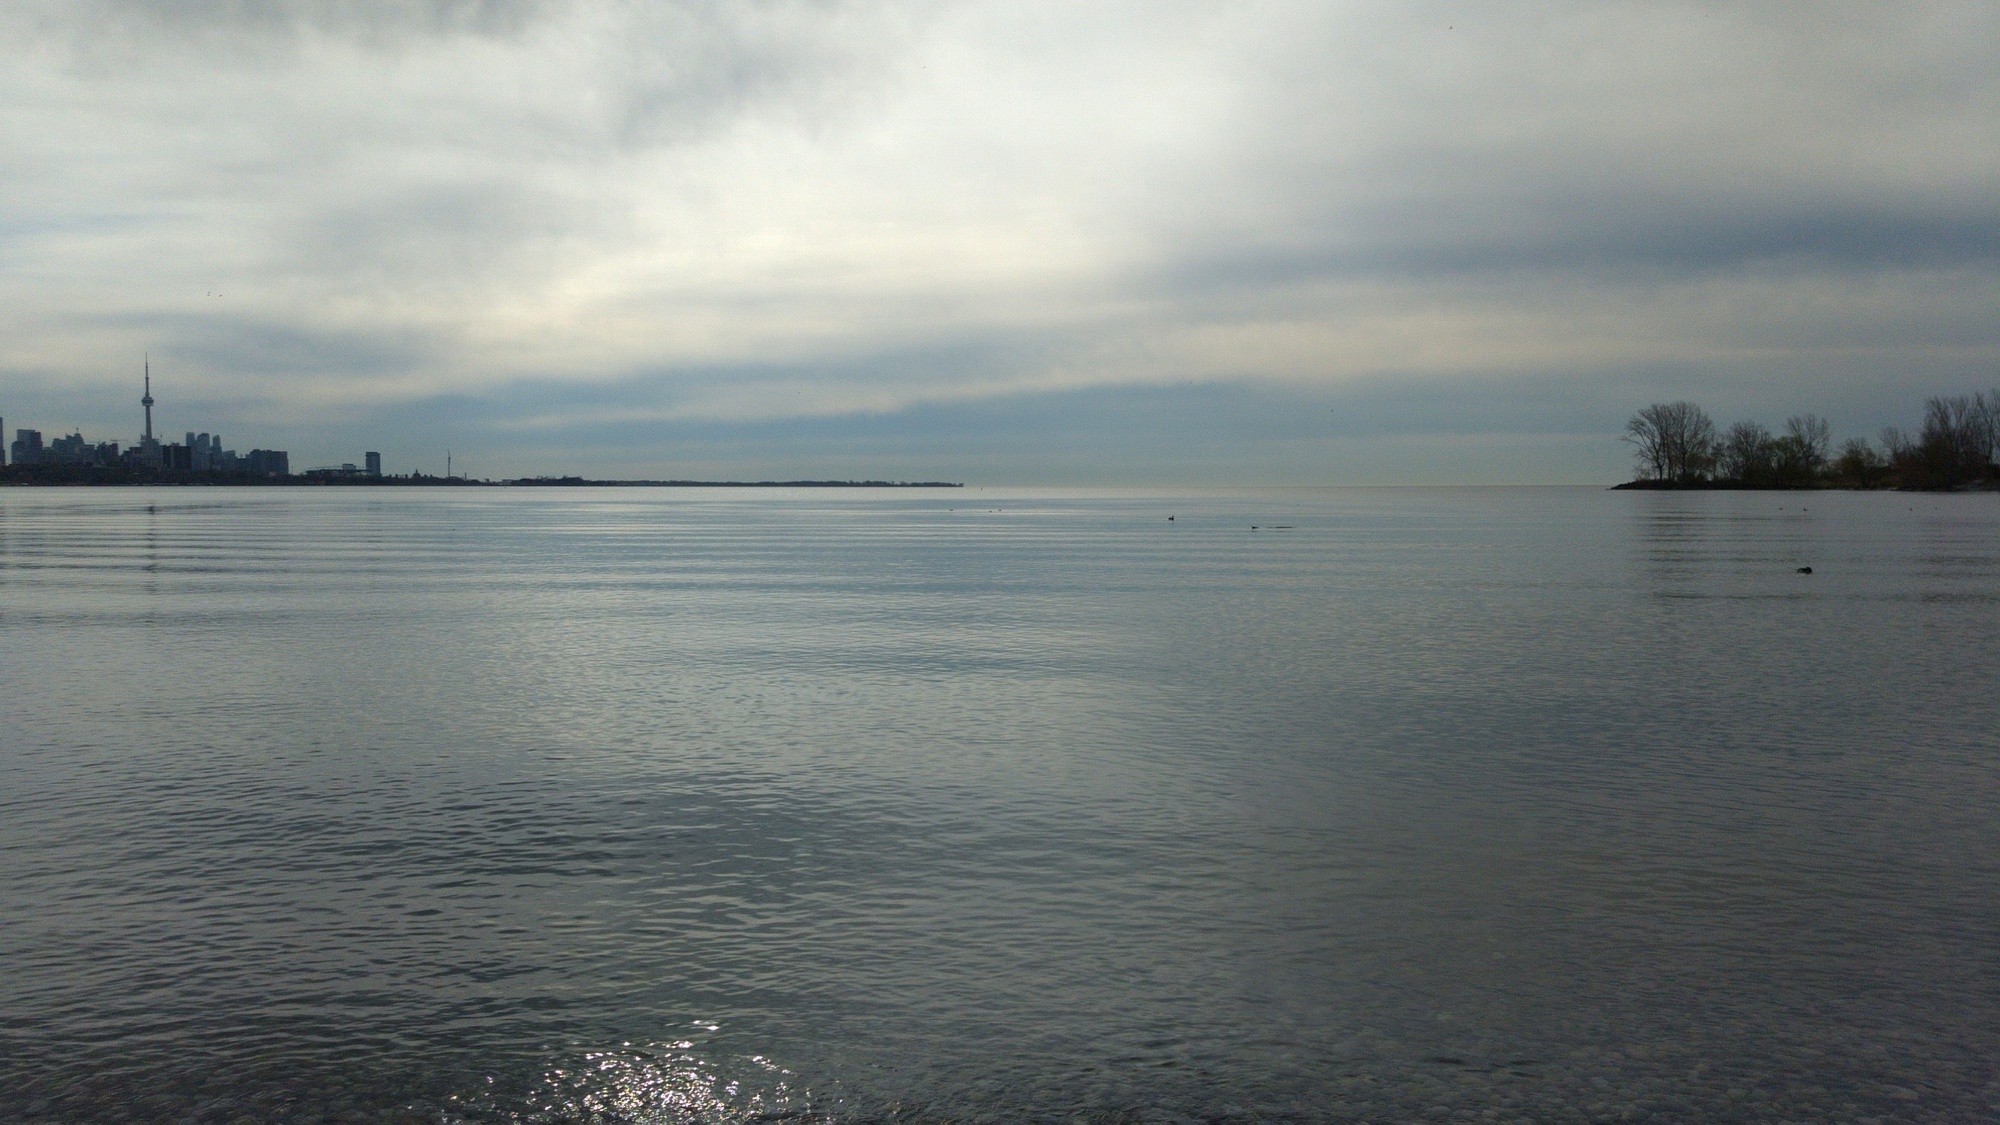 The skyline as seen from Humber Bay Shores Park looking south.